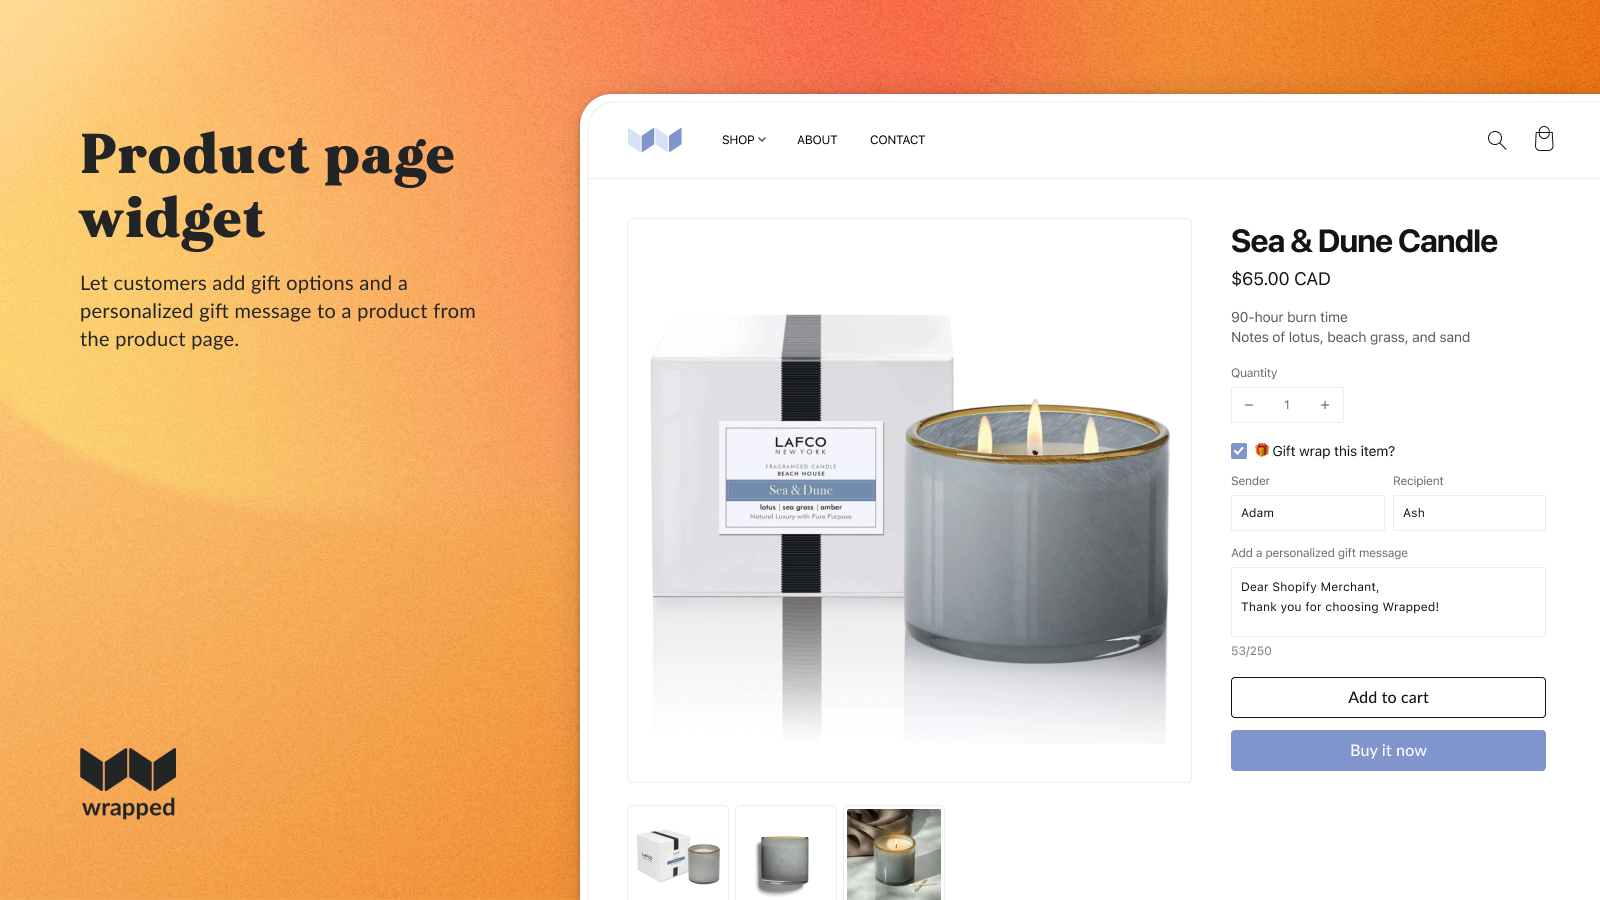 Product page. Add bundled gift options from the product page.